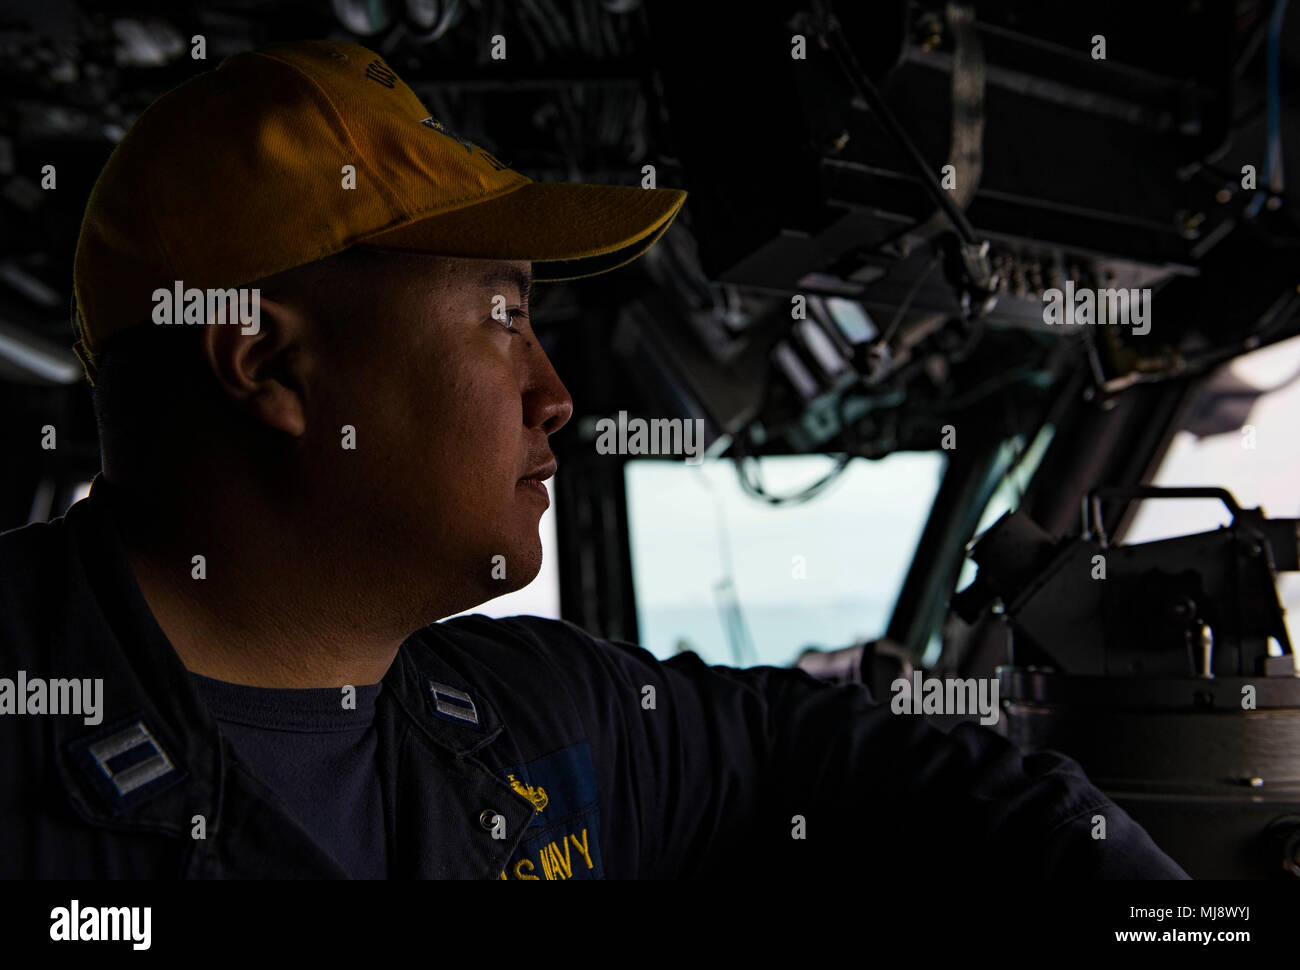 180421-N-BD308-0045 OKINAWA, Japan (April 21, 2018) Lt. Leighton Rodrigo stands watch in the bridge aboard the amphibious assault ship USS Wasp (LHD 1) as the ship prepares to moor in Okinawa to disembark the 31st Marine Expeditionary Unit. Wasp, part of the Wasp Expeditionary Strike Group, has been operating with the MEU for nearly two months as part of a routine patrol in the Indo-Pacific. (U.S. Navy photo by Mass Communication Specialist 3rd Class Levingston Lewis/Released) Stock Photo